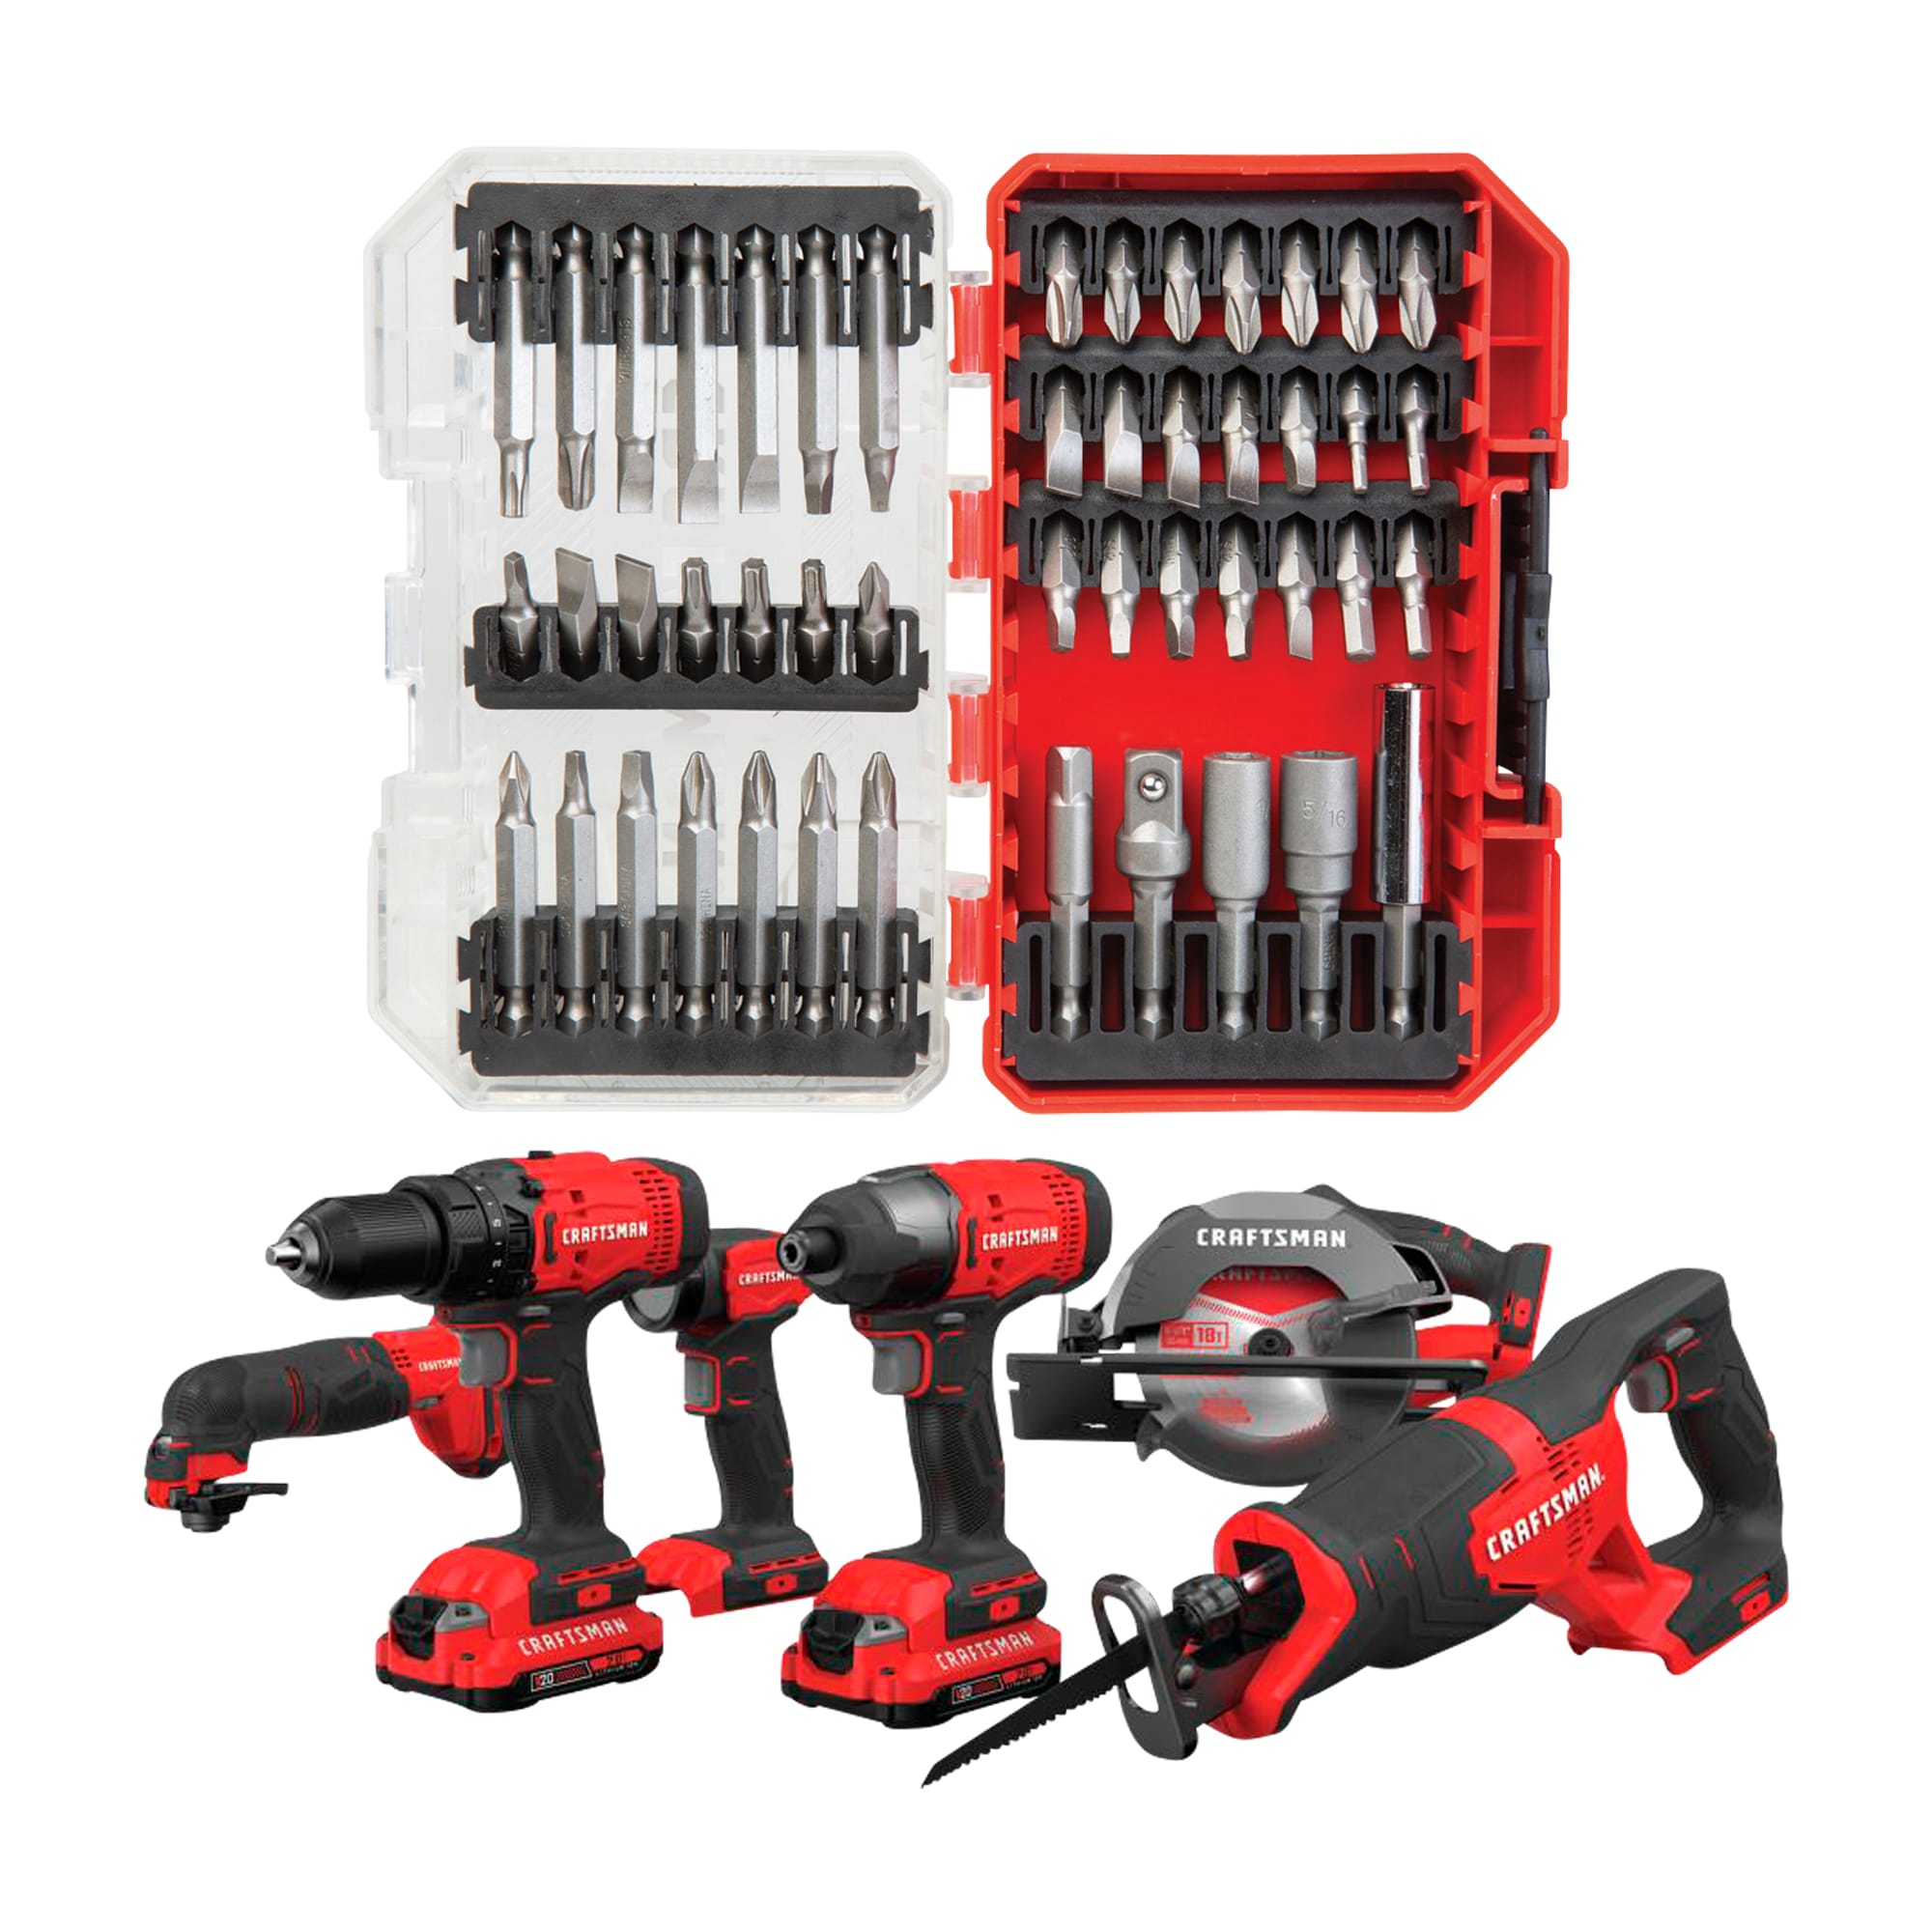 CRAFTSMAN V20* 6-Tool Power Tool Combo Kit with Soft Case (2-Batteries Included and Charger Included) & Set Steel Hex Shank Screwdriver Bit Set